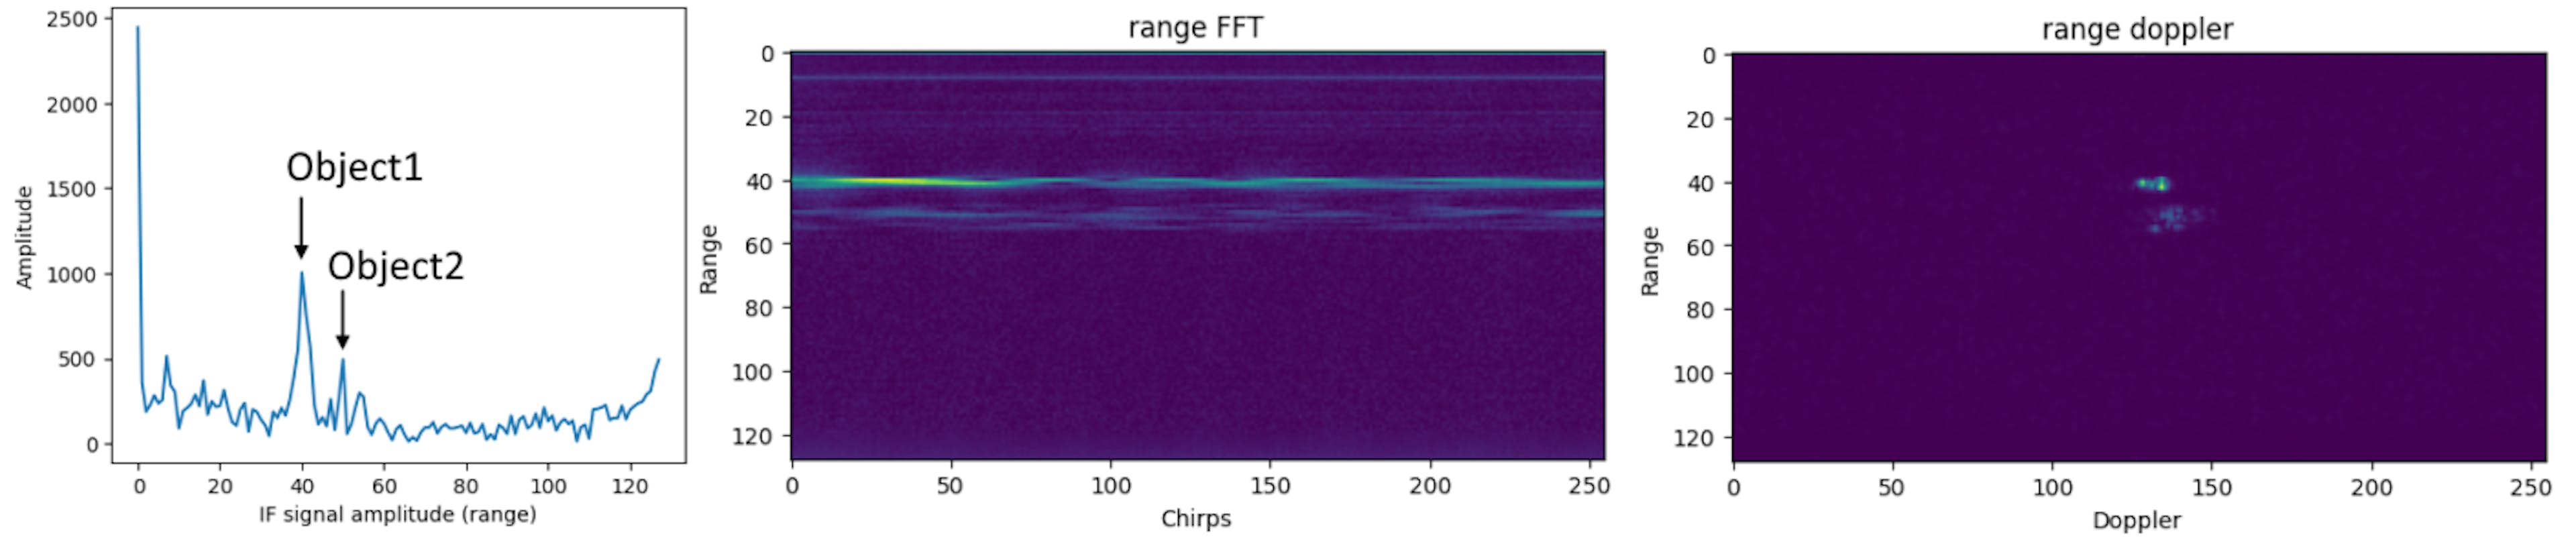 Left to right: IF signal of a single chirp after Fourier transform (range Fourier transform), radar frame after range Fourier transform, range-doppler image. The values of the "pixels" in a range-doppler image are the amplitude response and phase at a specific speed and distance.